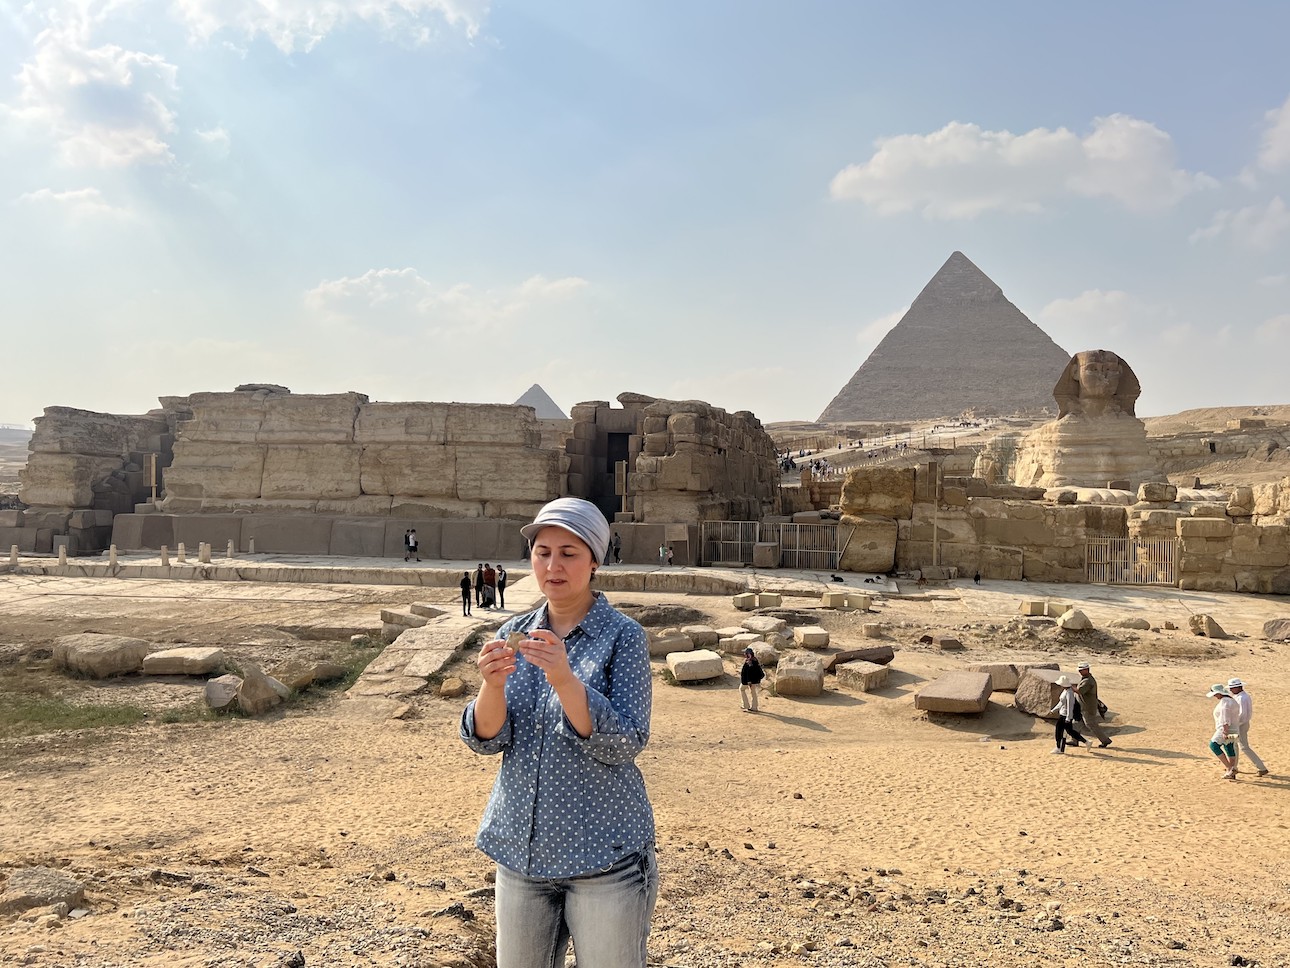 A woman stands in the foreground wearing jeans and a blue shirt with white polka dots. She holds a piece of rock and is looking at it. A pyramid, some stone structures and the Great Sphynx of Giza are all in the background